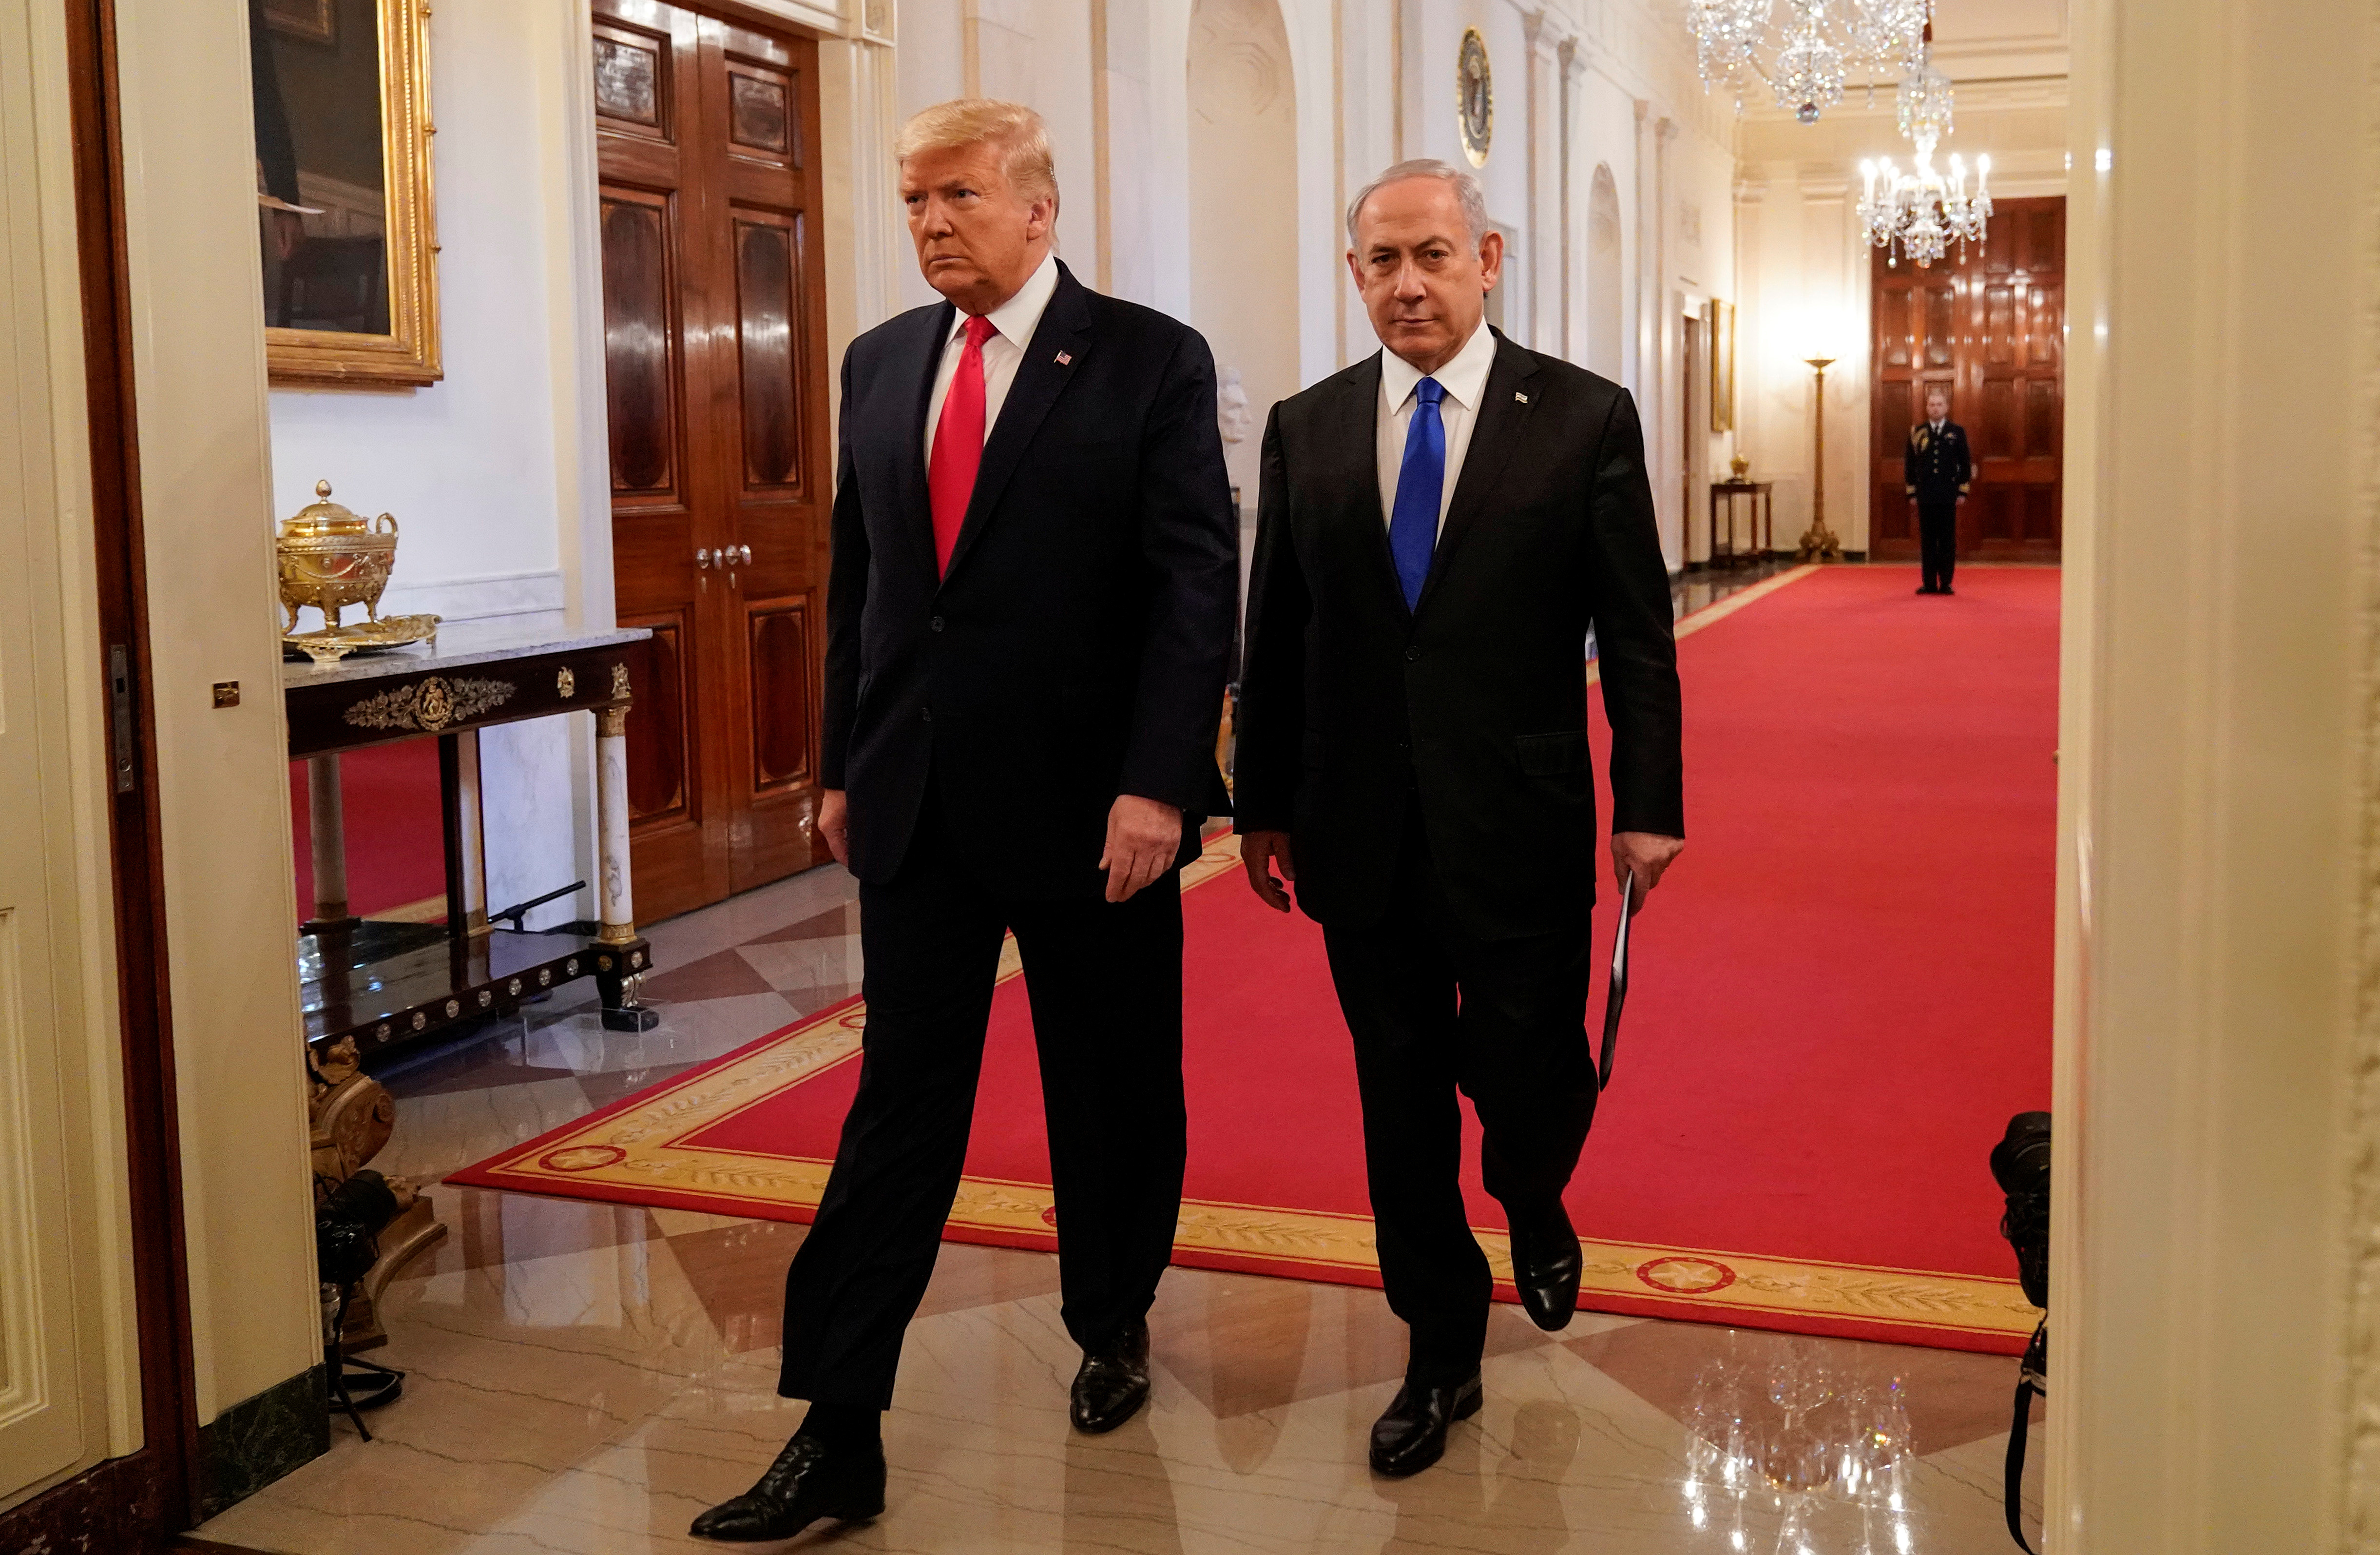 U.S. President Trump and Israel's Prime Mininister Netanyahu arrive to deliver joint remarks on Middle East peace plan proposal at the White House in Washington, U.S., January 28, 2020. REUTERS/Joshua Roberts